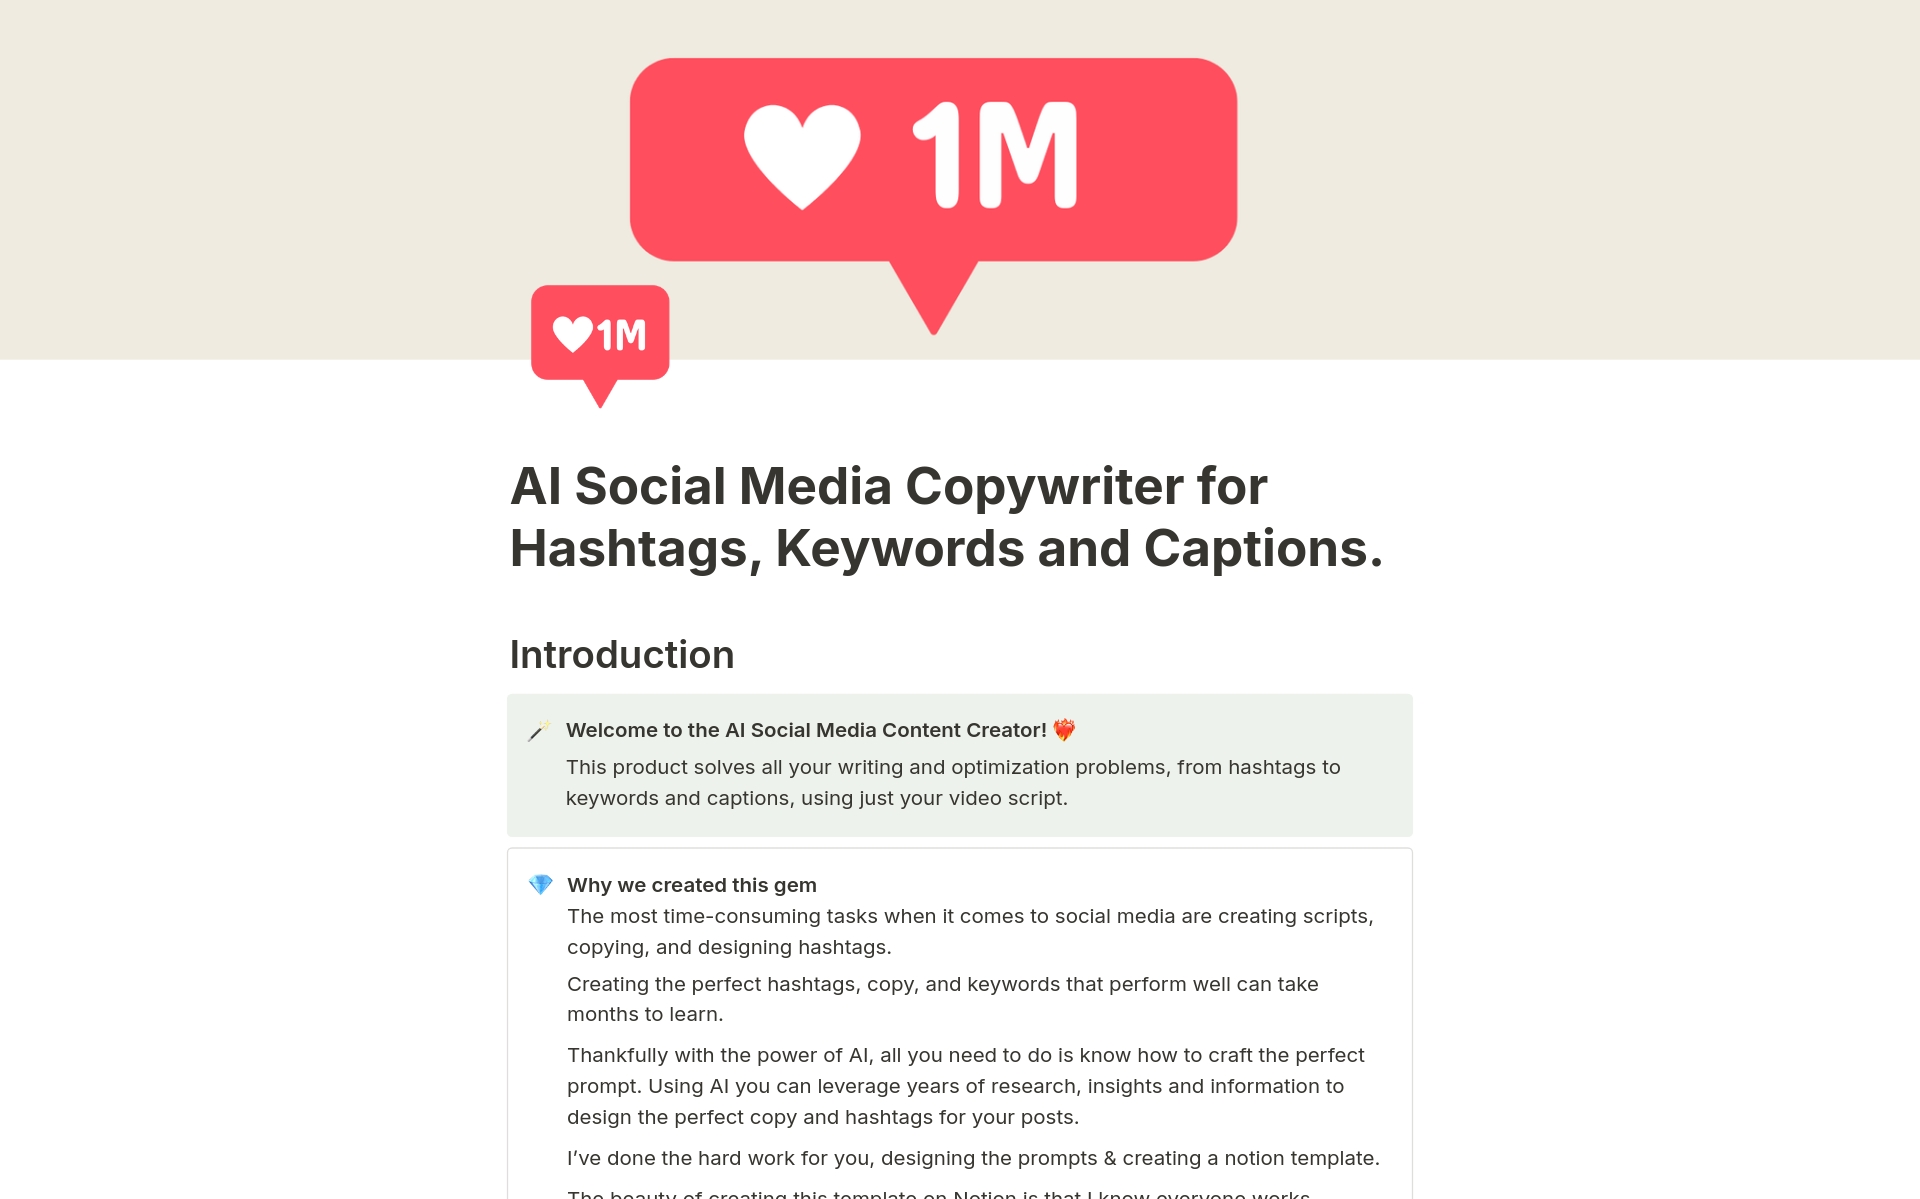 Using AI you can leverage years of research, insights and information to design the perfect social media hashtags, keywords, hooks and titles. We've done the hard work engineering the perfect prompts to help your content reach the right audiences no matter what social media platf